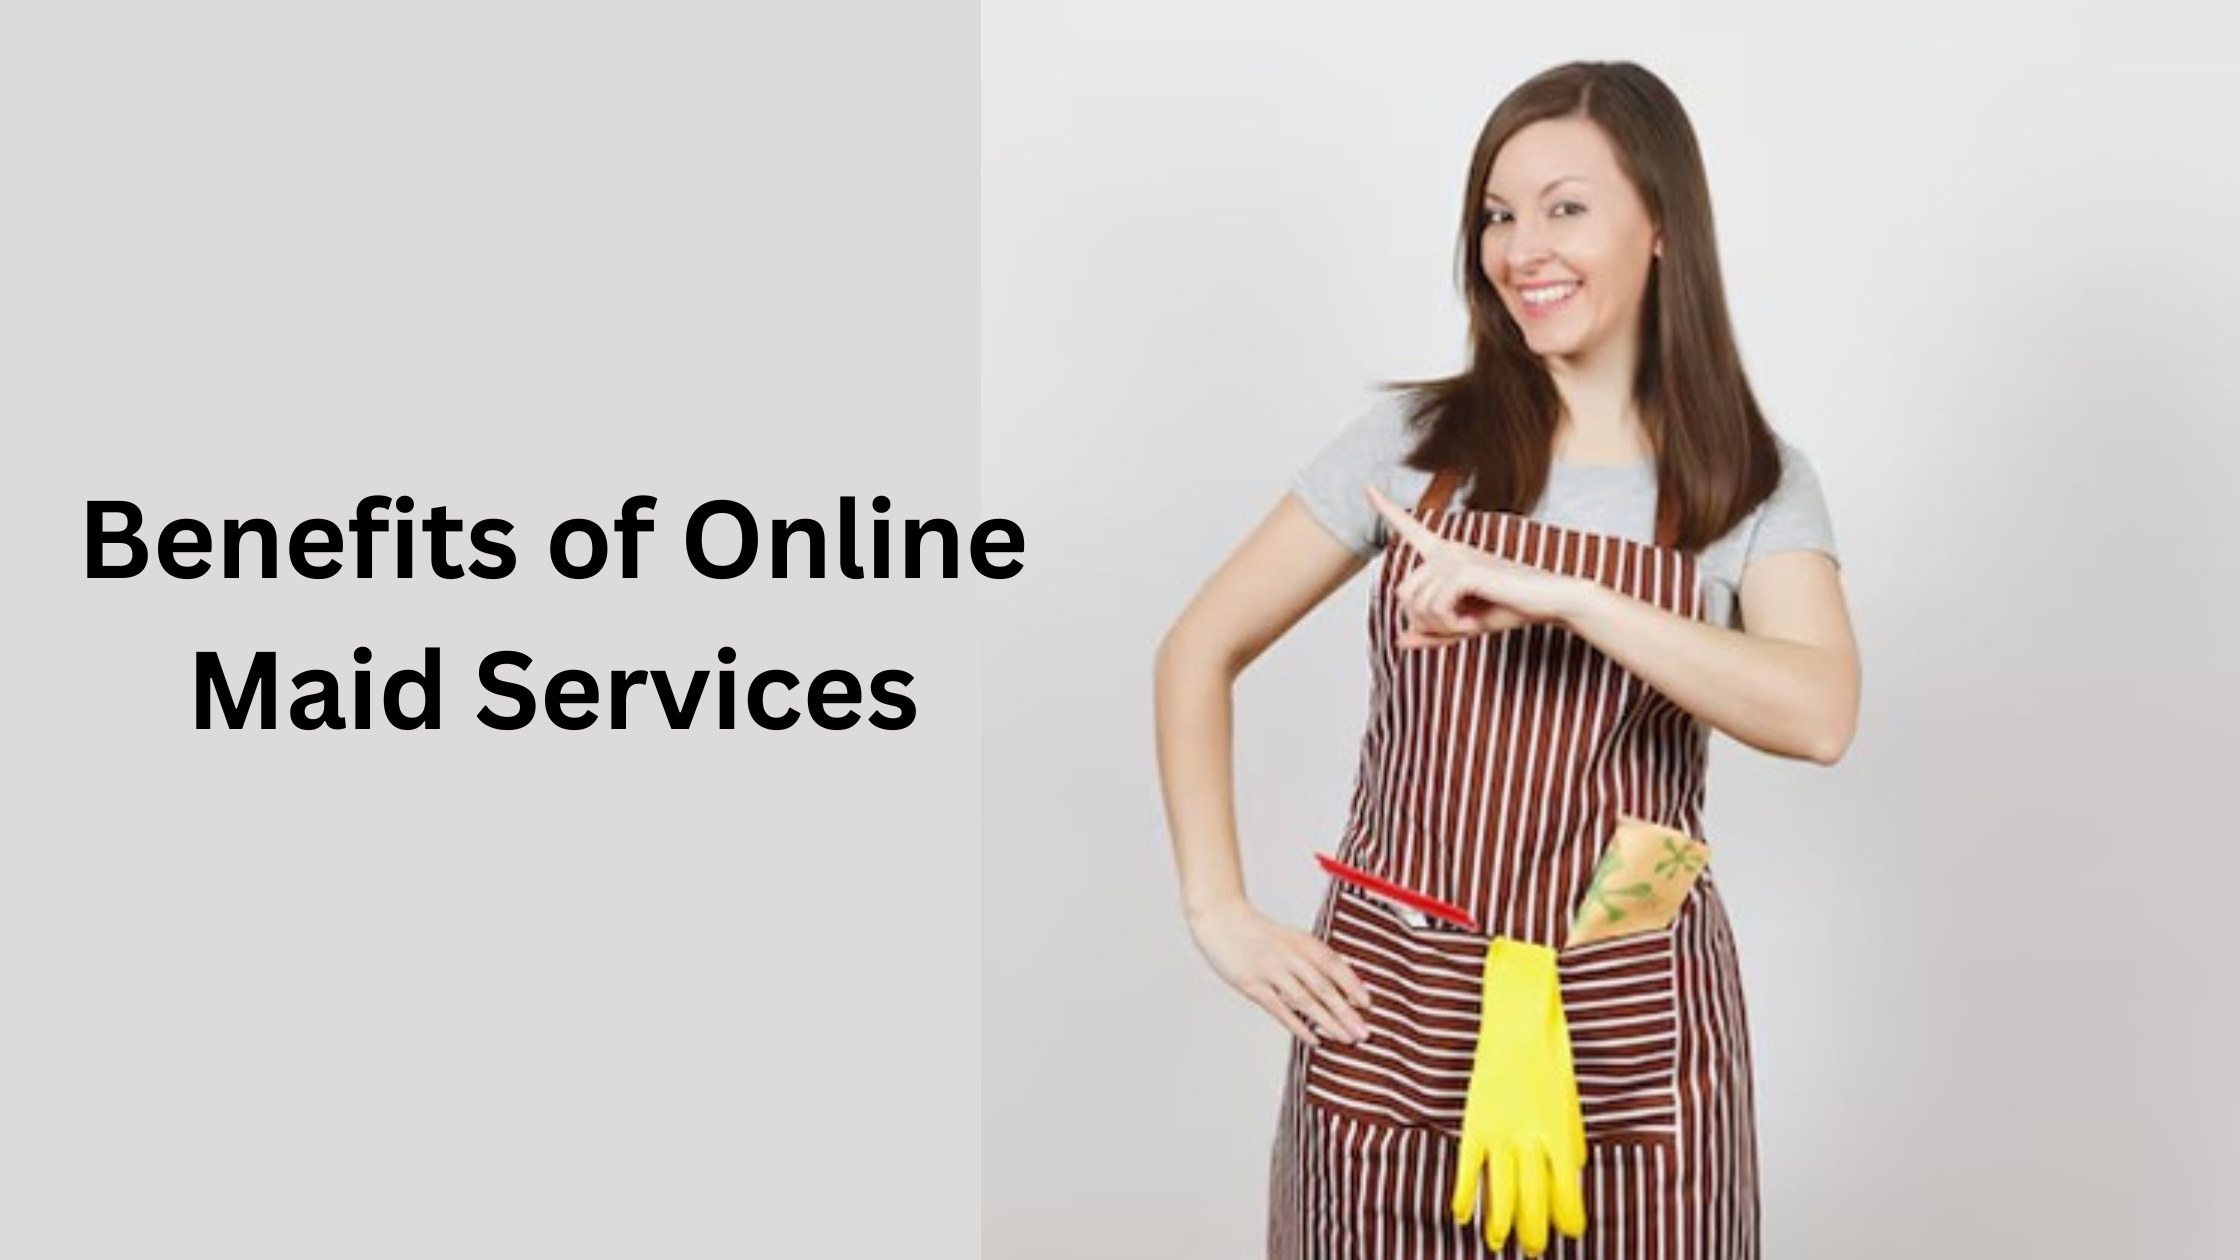 Online maid services are platforms where users can conveniently book maid services through websites or apps.